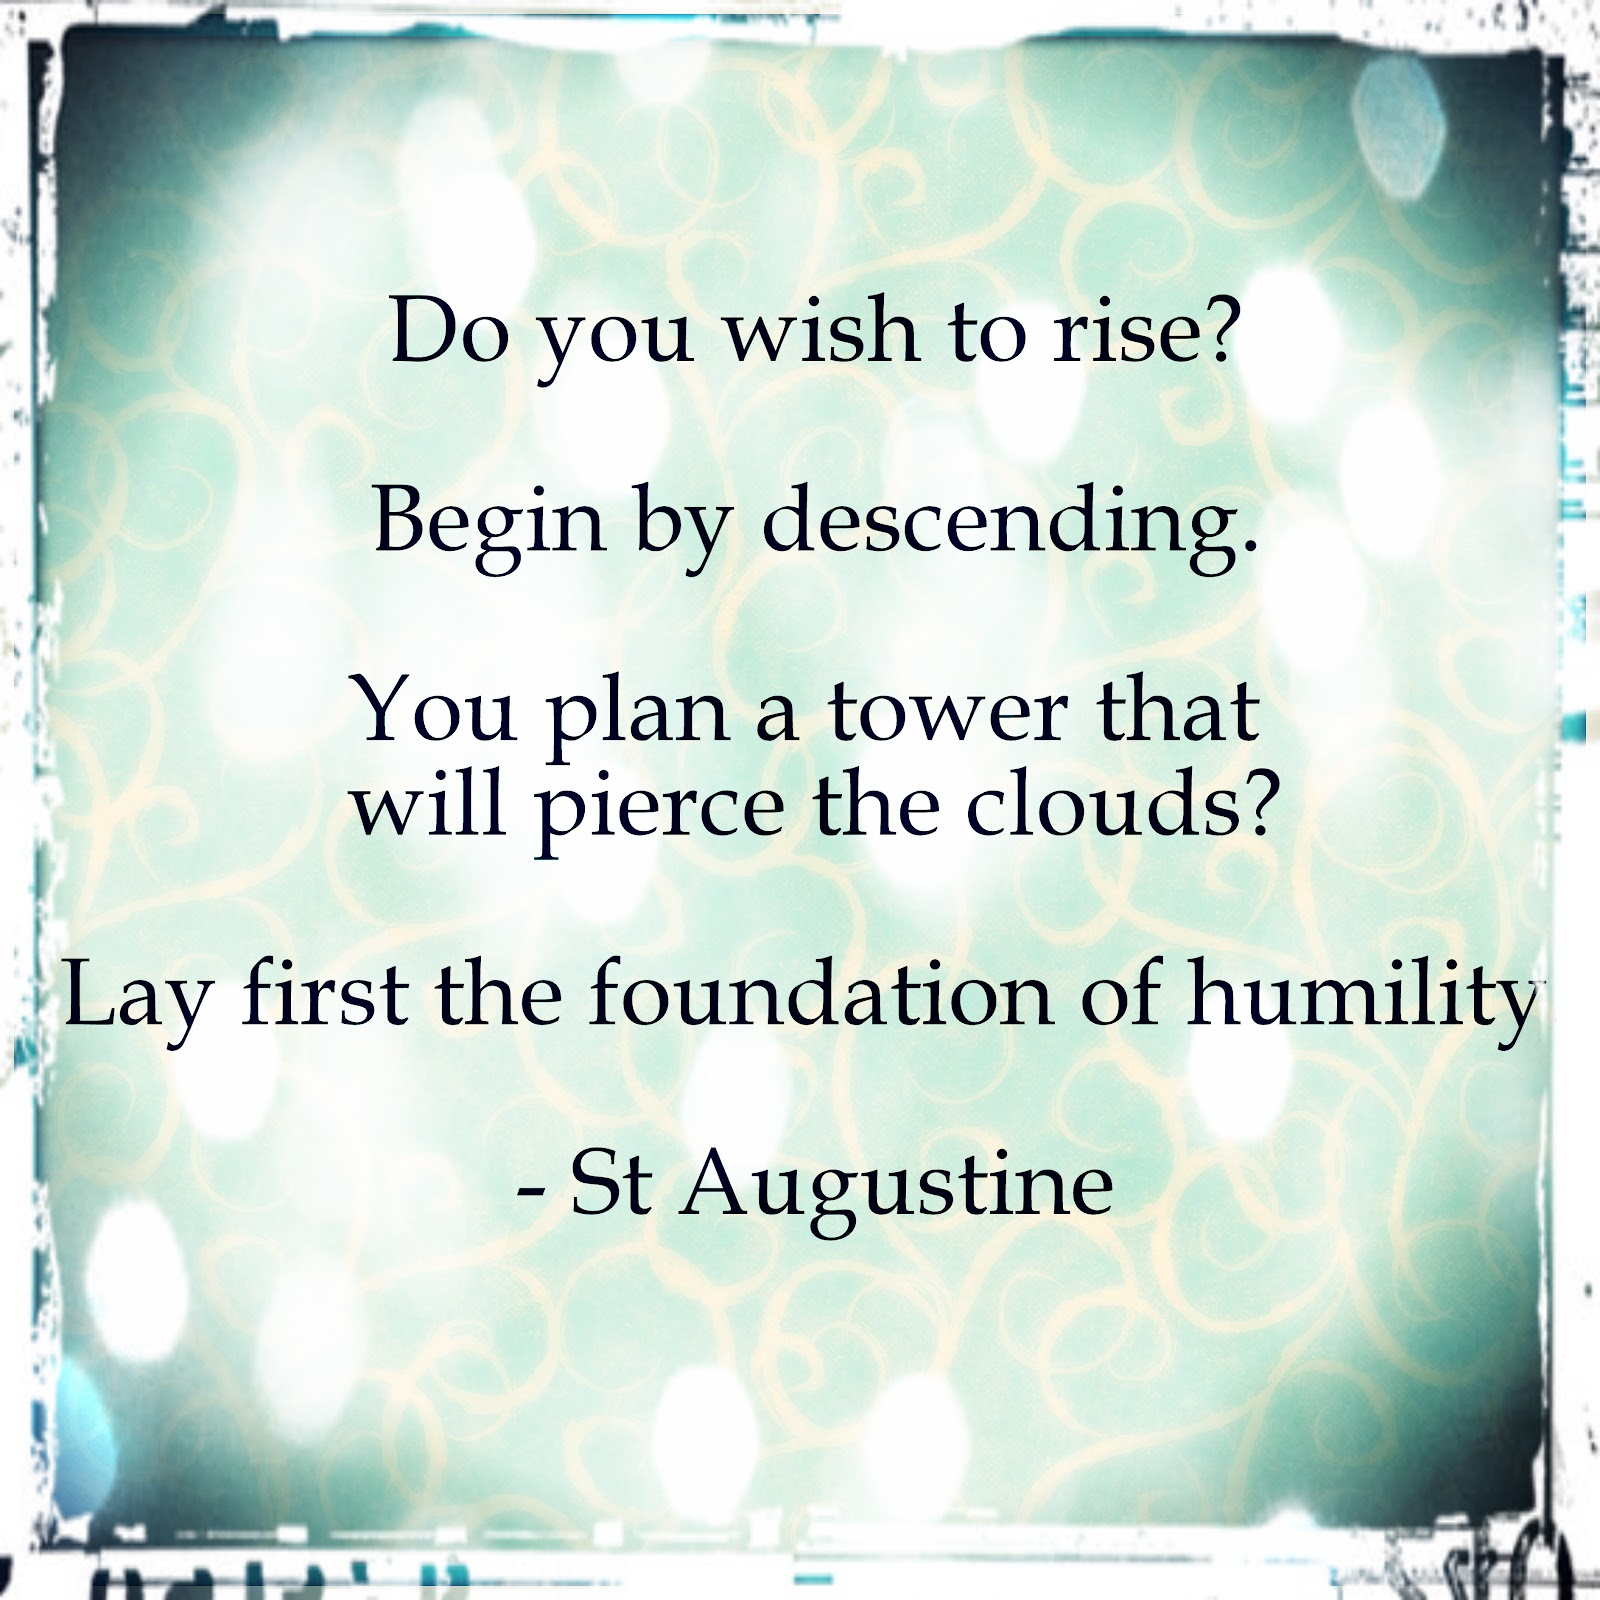 Do you wish to rise1 Begin by descending. You plan a tower that will pierce the clouds1 Lay first the... Saint Augustine. You plan a tower that will pierce the clouds1 Lay... Saint Augustine